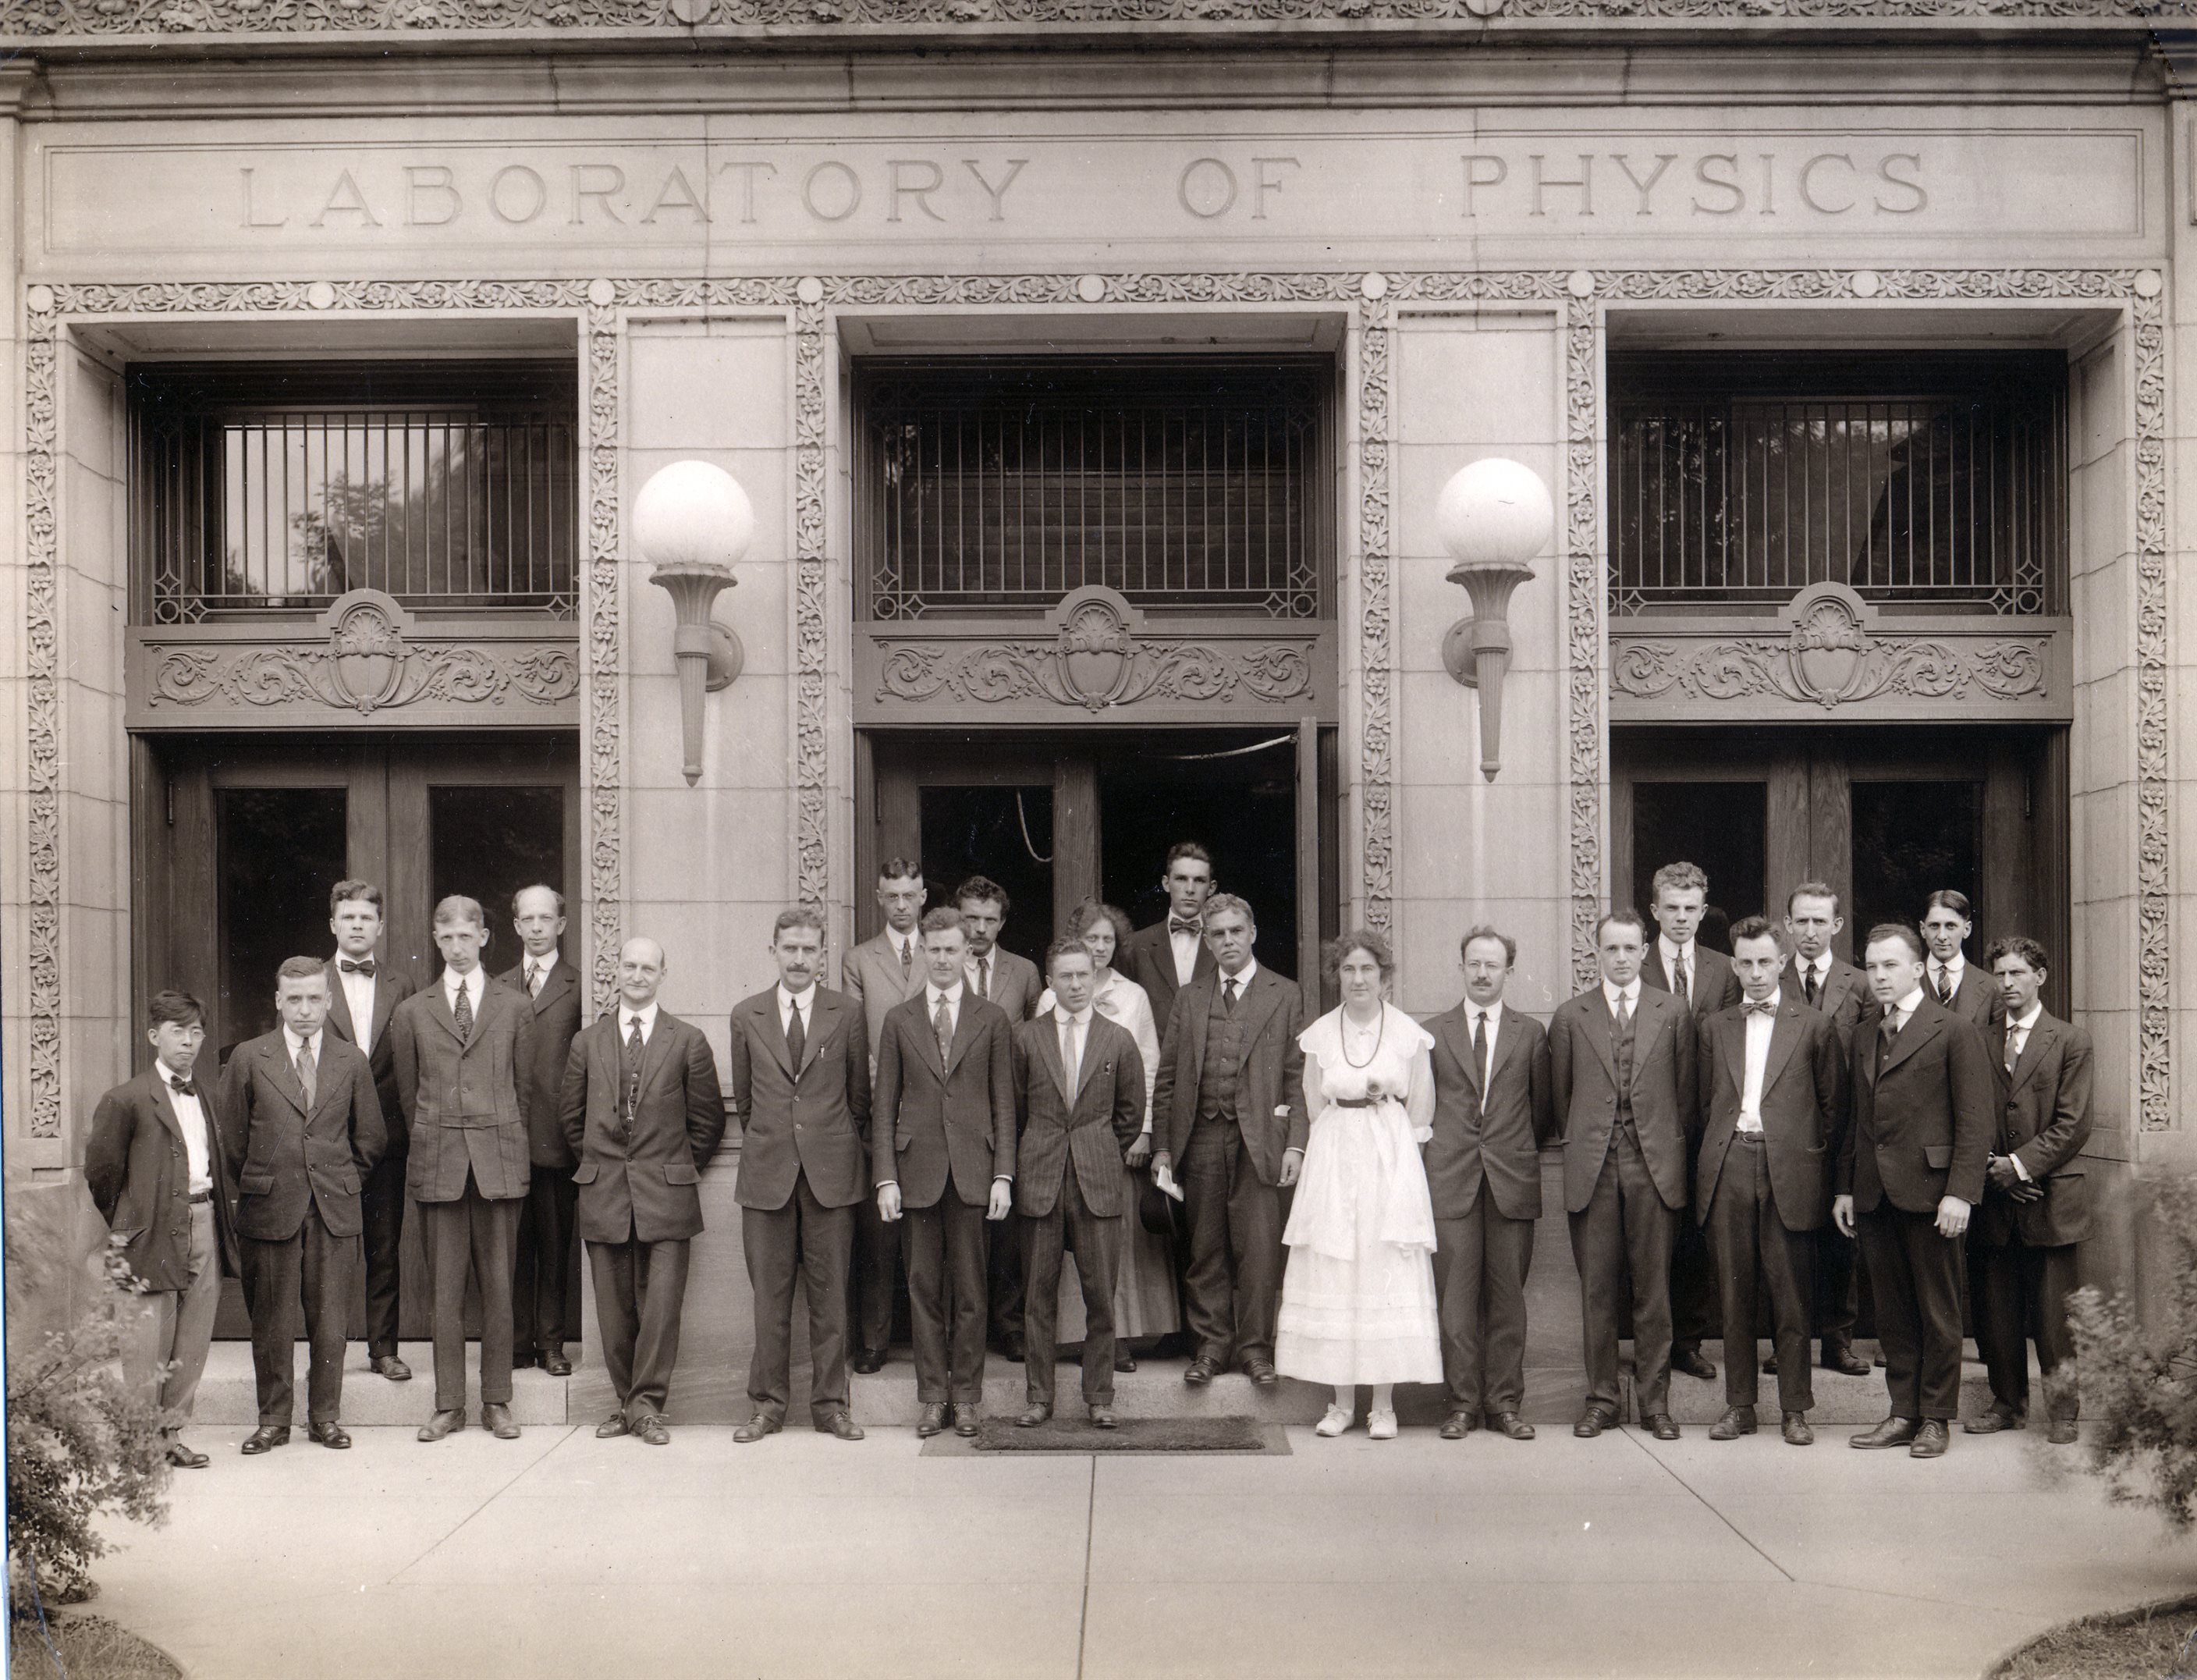 Members of the Department of Physics at Illinois circa 1915/16. Physics alumna Eleanor Frances Seiler, the department&rsquo;s first woman PhD graduate (1922), stands in the fron row in a white dress. Just behind her to the viewer&rsquo;s left is Head of Department Albert P. Carman and next to him, department secretary Della M. Rogers (then the only other woman in the department). Photo credit Illinois Physics, courtesy of AIP Emilio Segr&egrave; Visual Archives